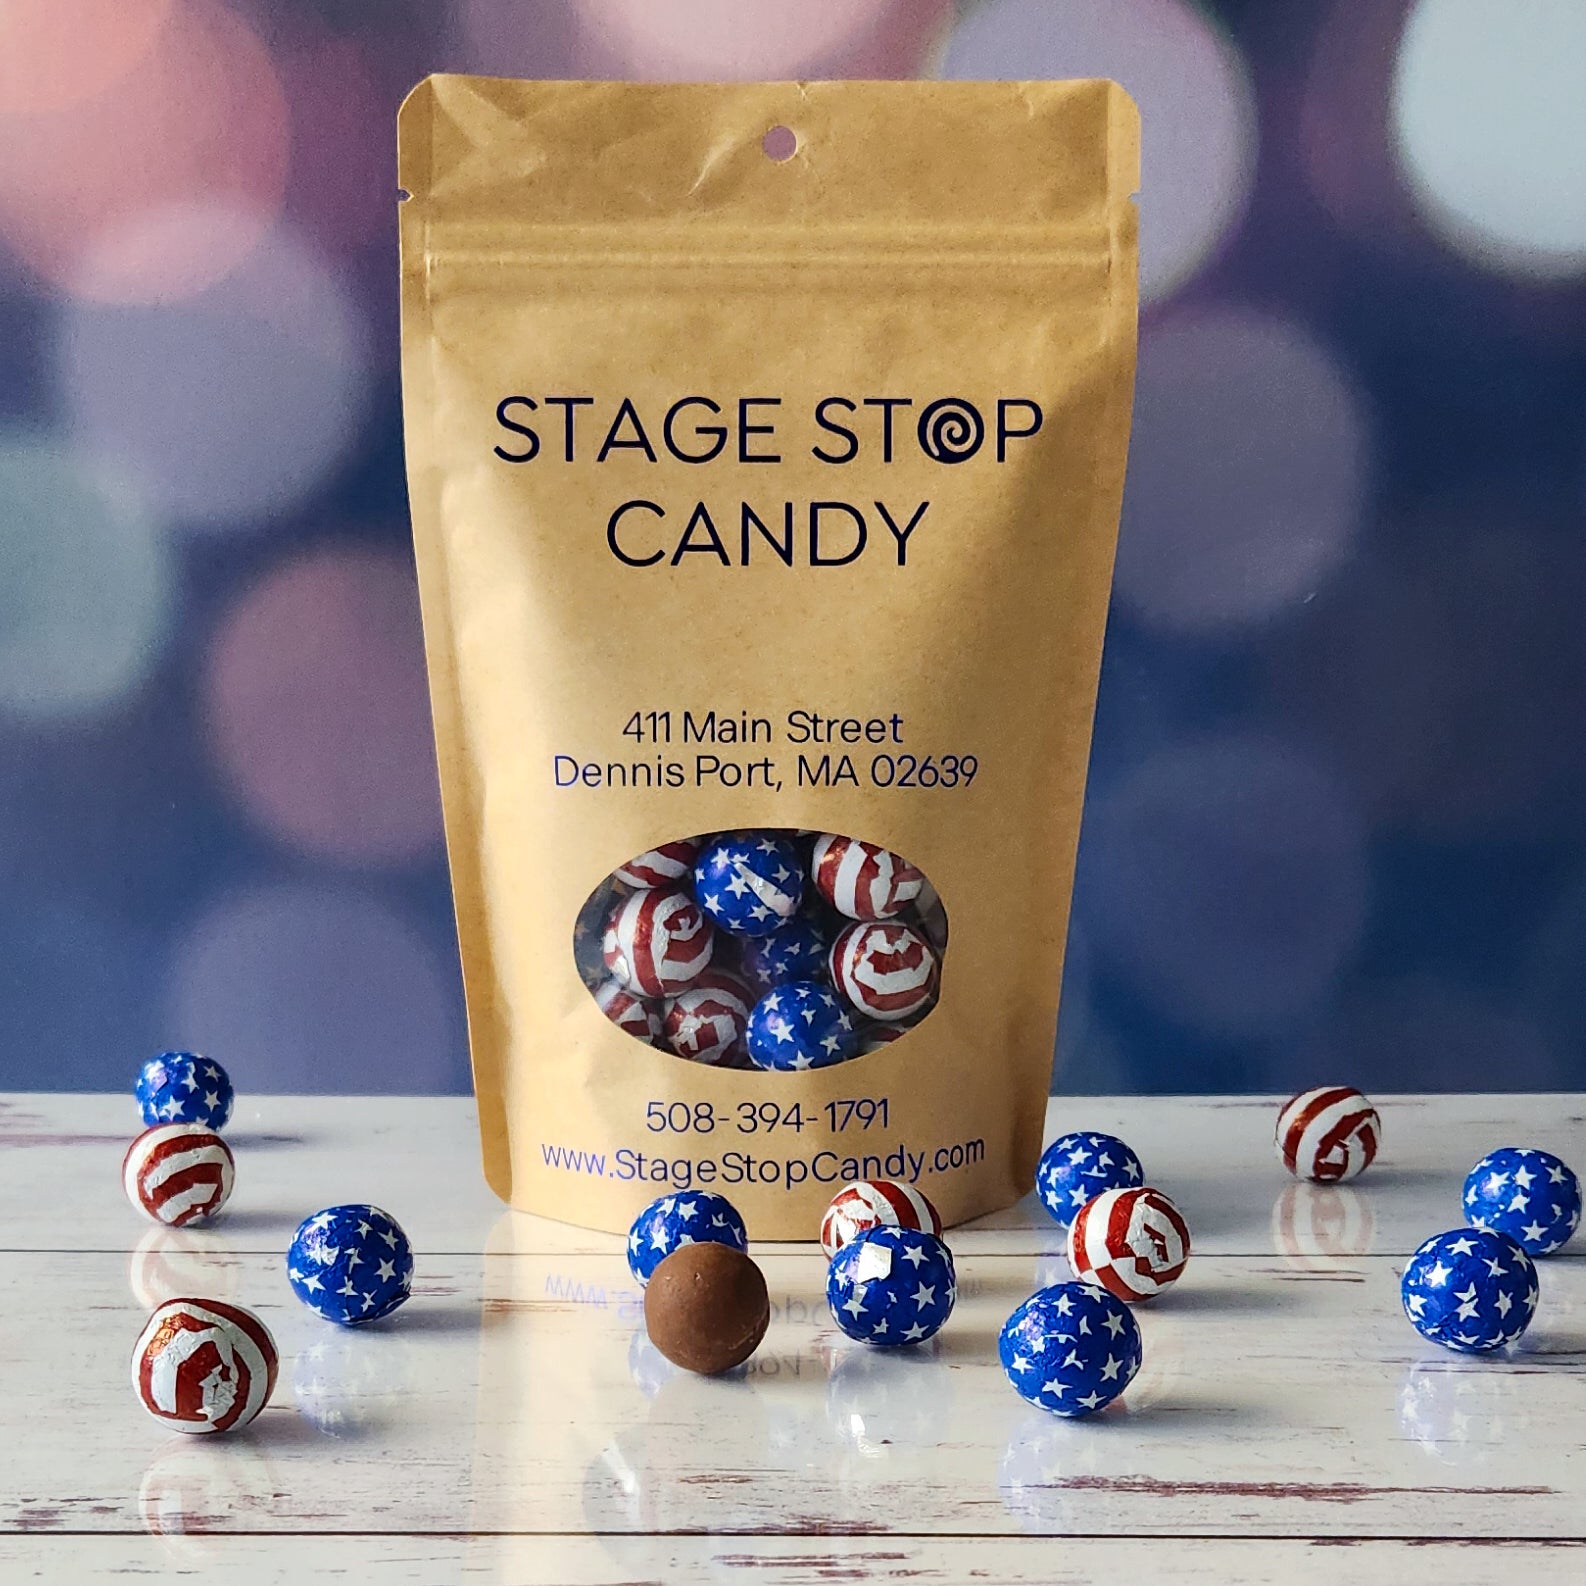 Celebrate with our Stars and Stripes Foiled Milk Chocolate Balls, packed in a 7-ounce bag and perfect for adding a patriotic touch to any event. Each creamy milk chocolate ball is wrapped in vibrant foil, making them an ideal sweet treat for parties, gift baskets, or festive celebrations.